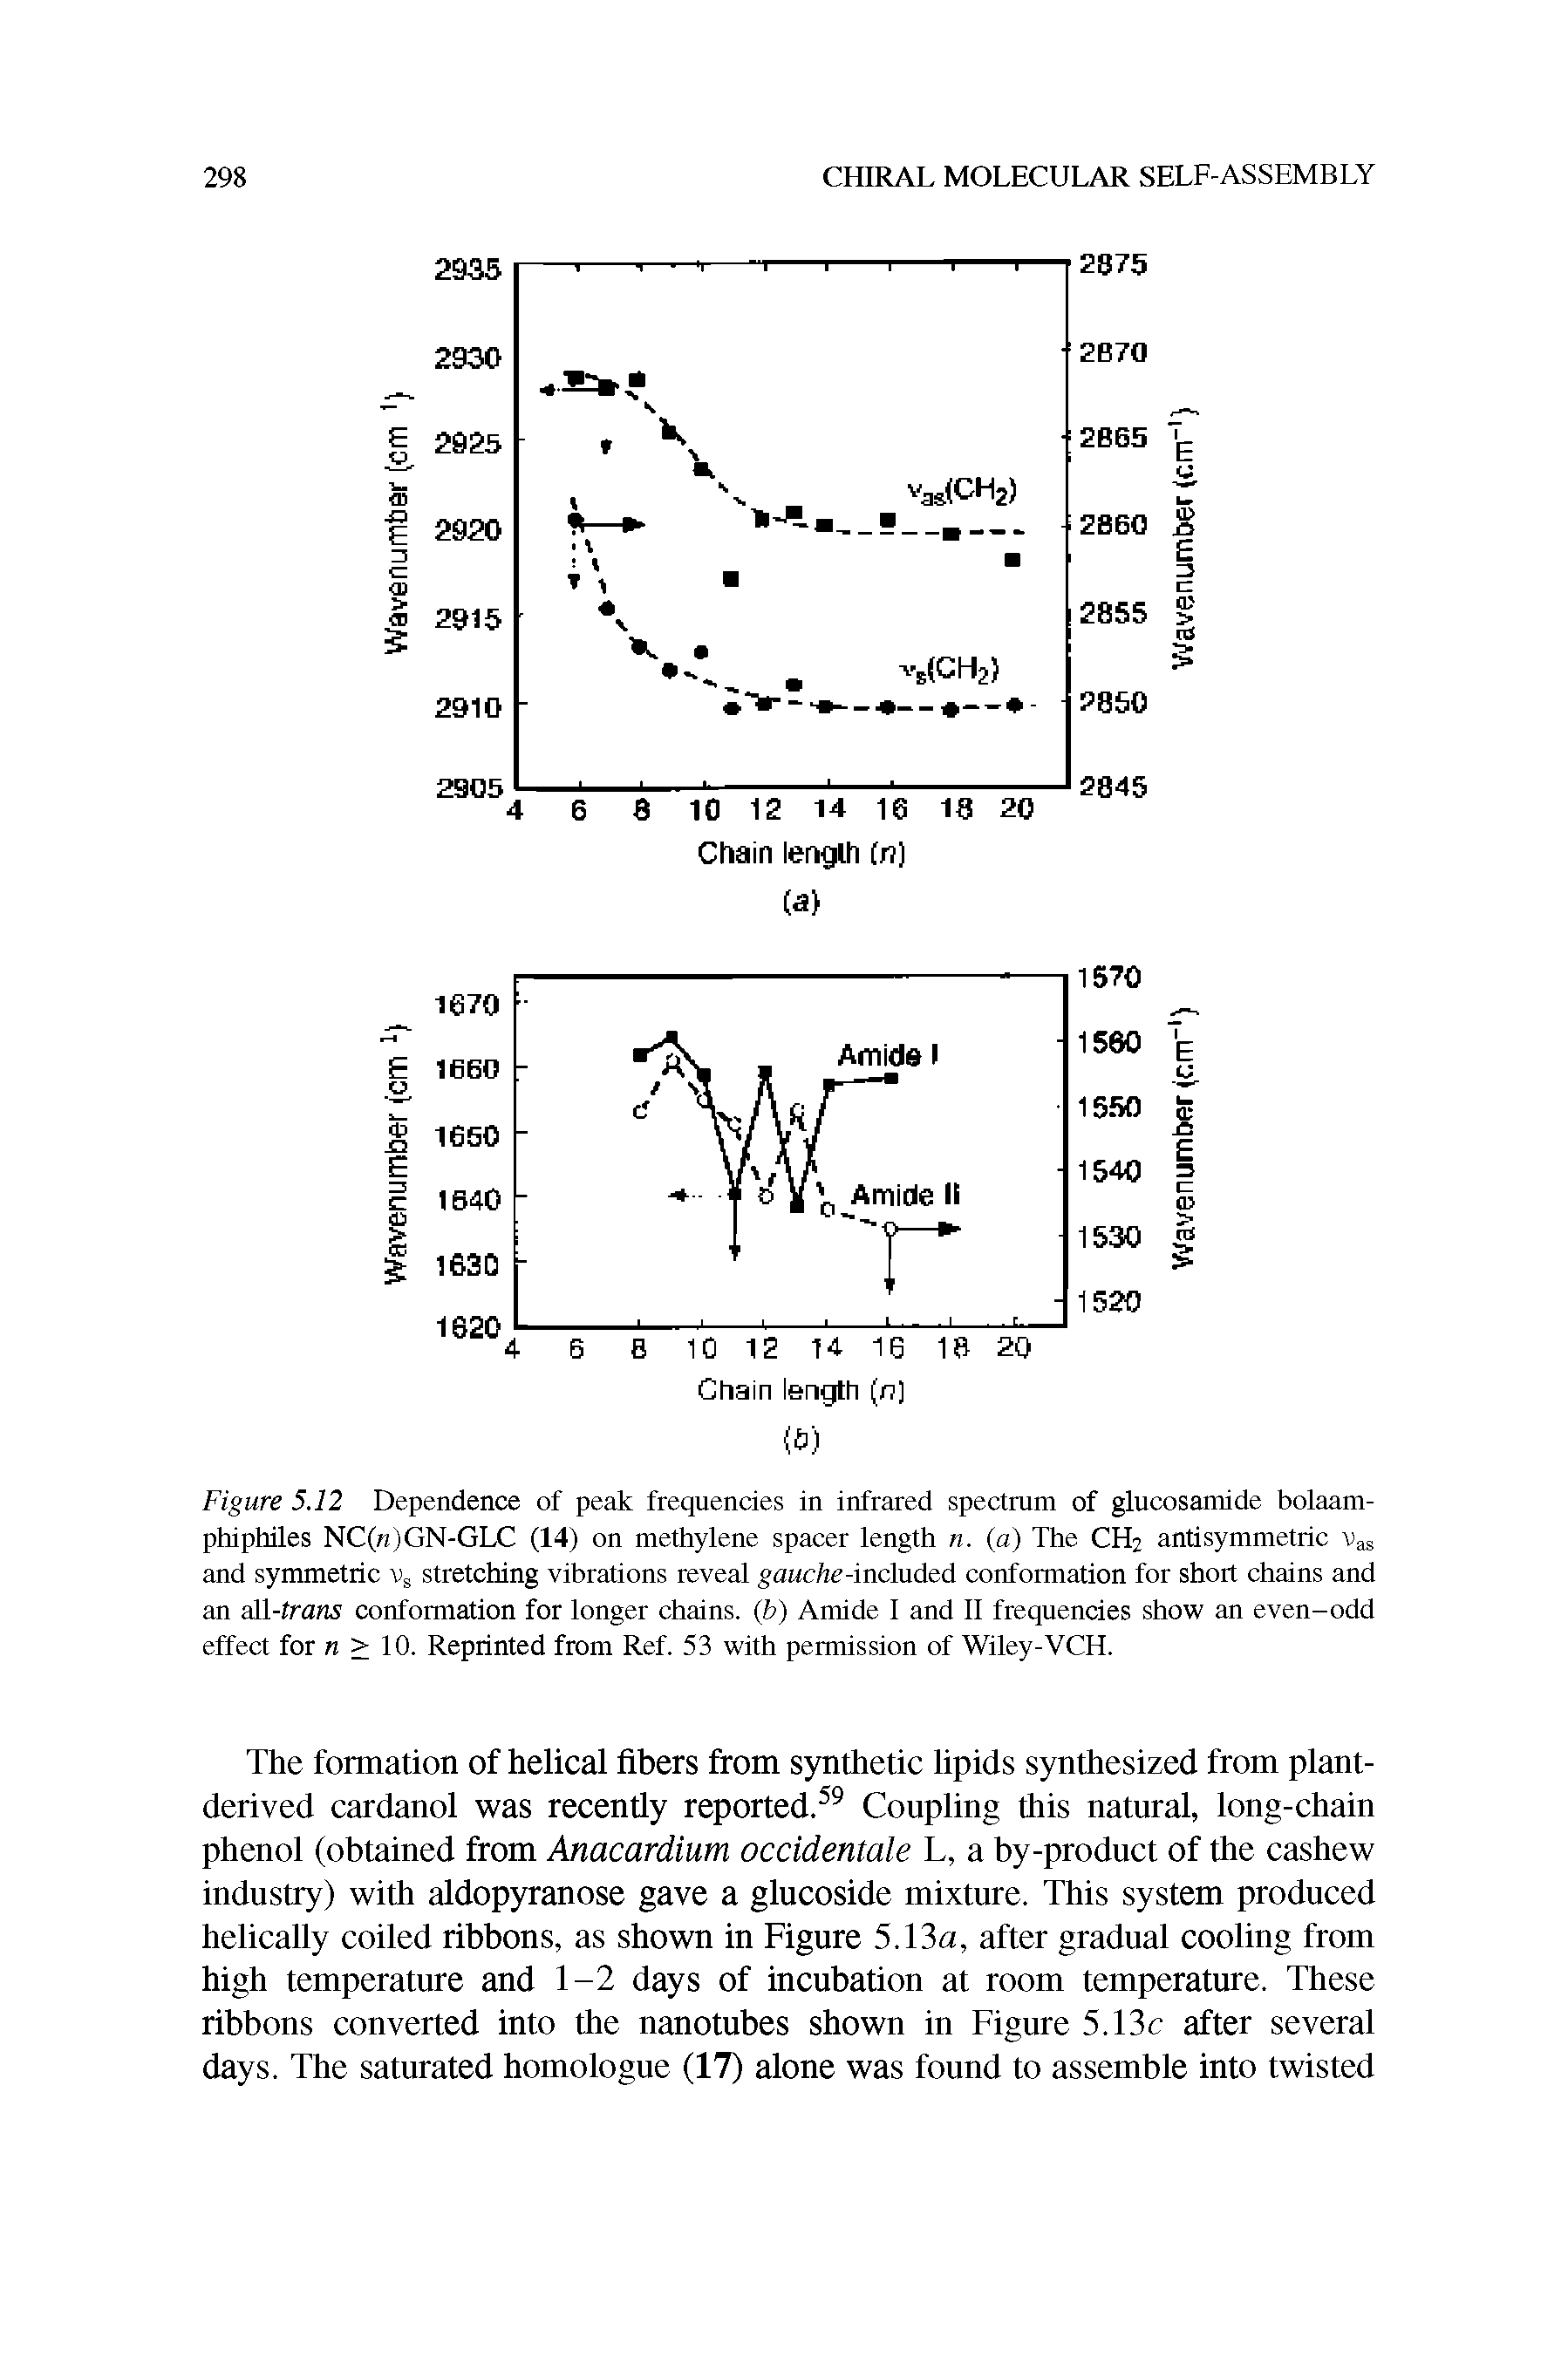 Figure 5.12 Dependence of peak frequencies in infrared spectrum of glucosamide bolaam-phiphiles NC( )GN-GLC (14) on methylene spacer length n. (a) The CH2 antisymmetric vas and symmetric vs stretching vibrations reveal gauche-included conformation for short chains and an all-trans conformation for longer chains, (b) Amide I and II frequencies show an even-odd effect for n > 10. Reprinted from Ref. 53 with permission of Wiley-VCH.